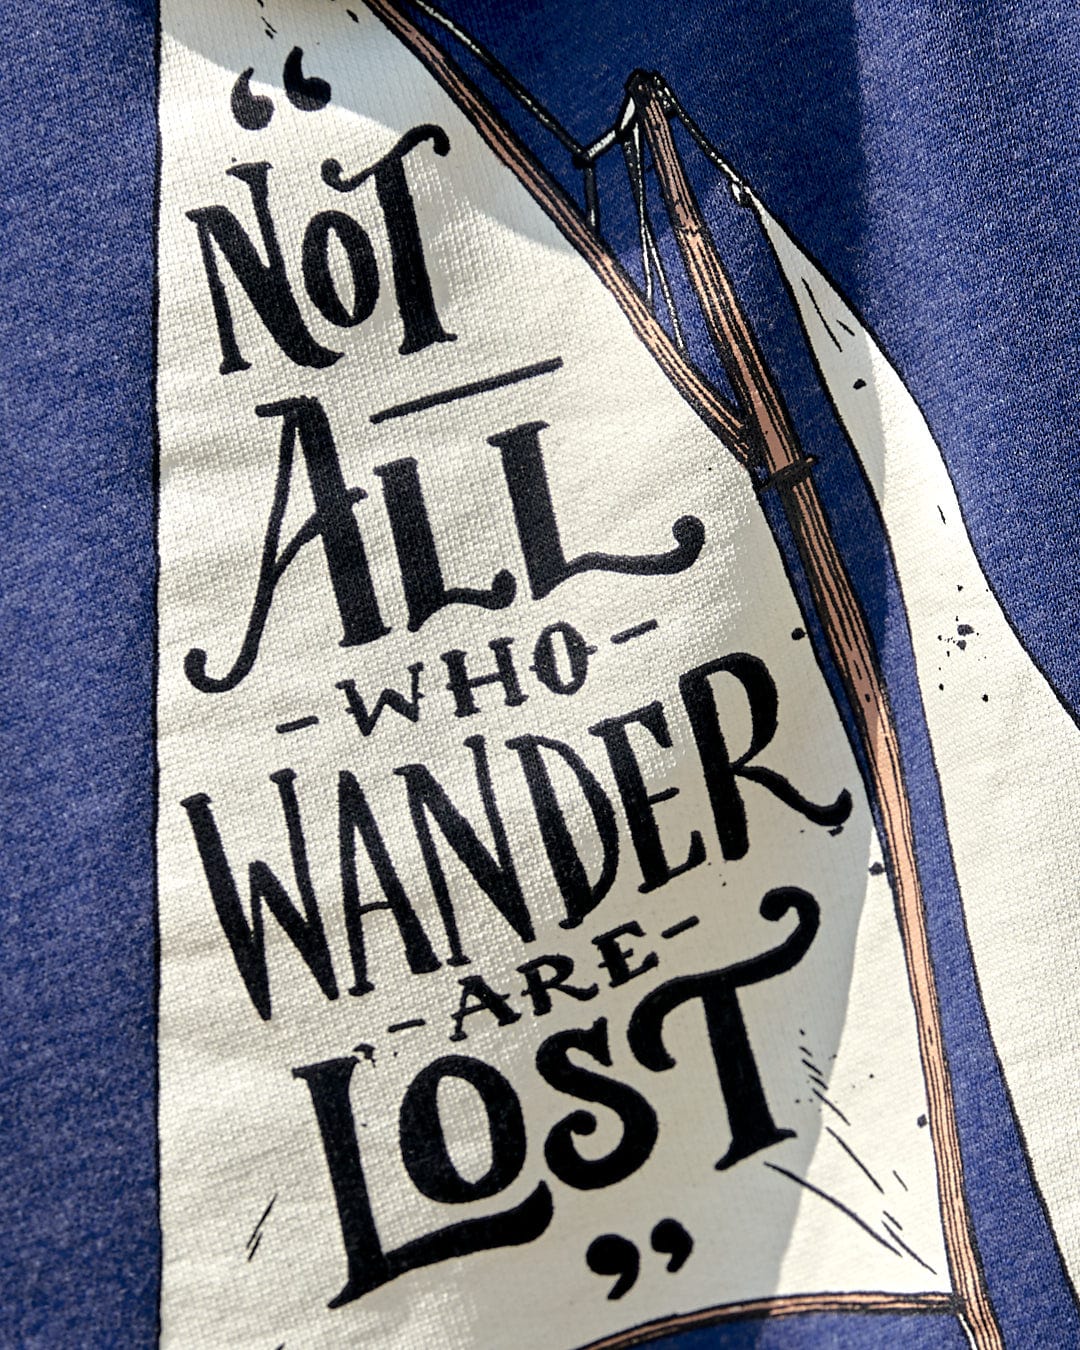 T-shirt featuring a sailboat and the phrase "Not all who wander are lost".
Product Name: Lost Ships - Mens Pop Hoodie - Blue Marl
Brand Name: Saltrock

Hoodie featuring a sailboat and the phrase "Not all who wander are lost".